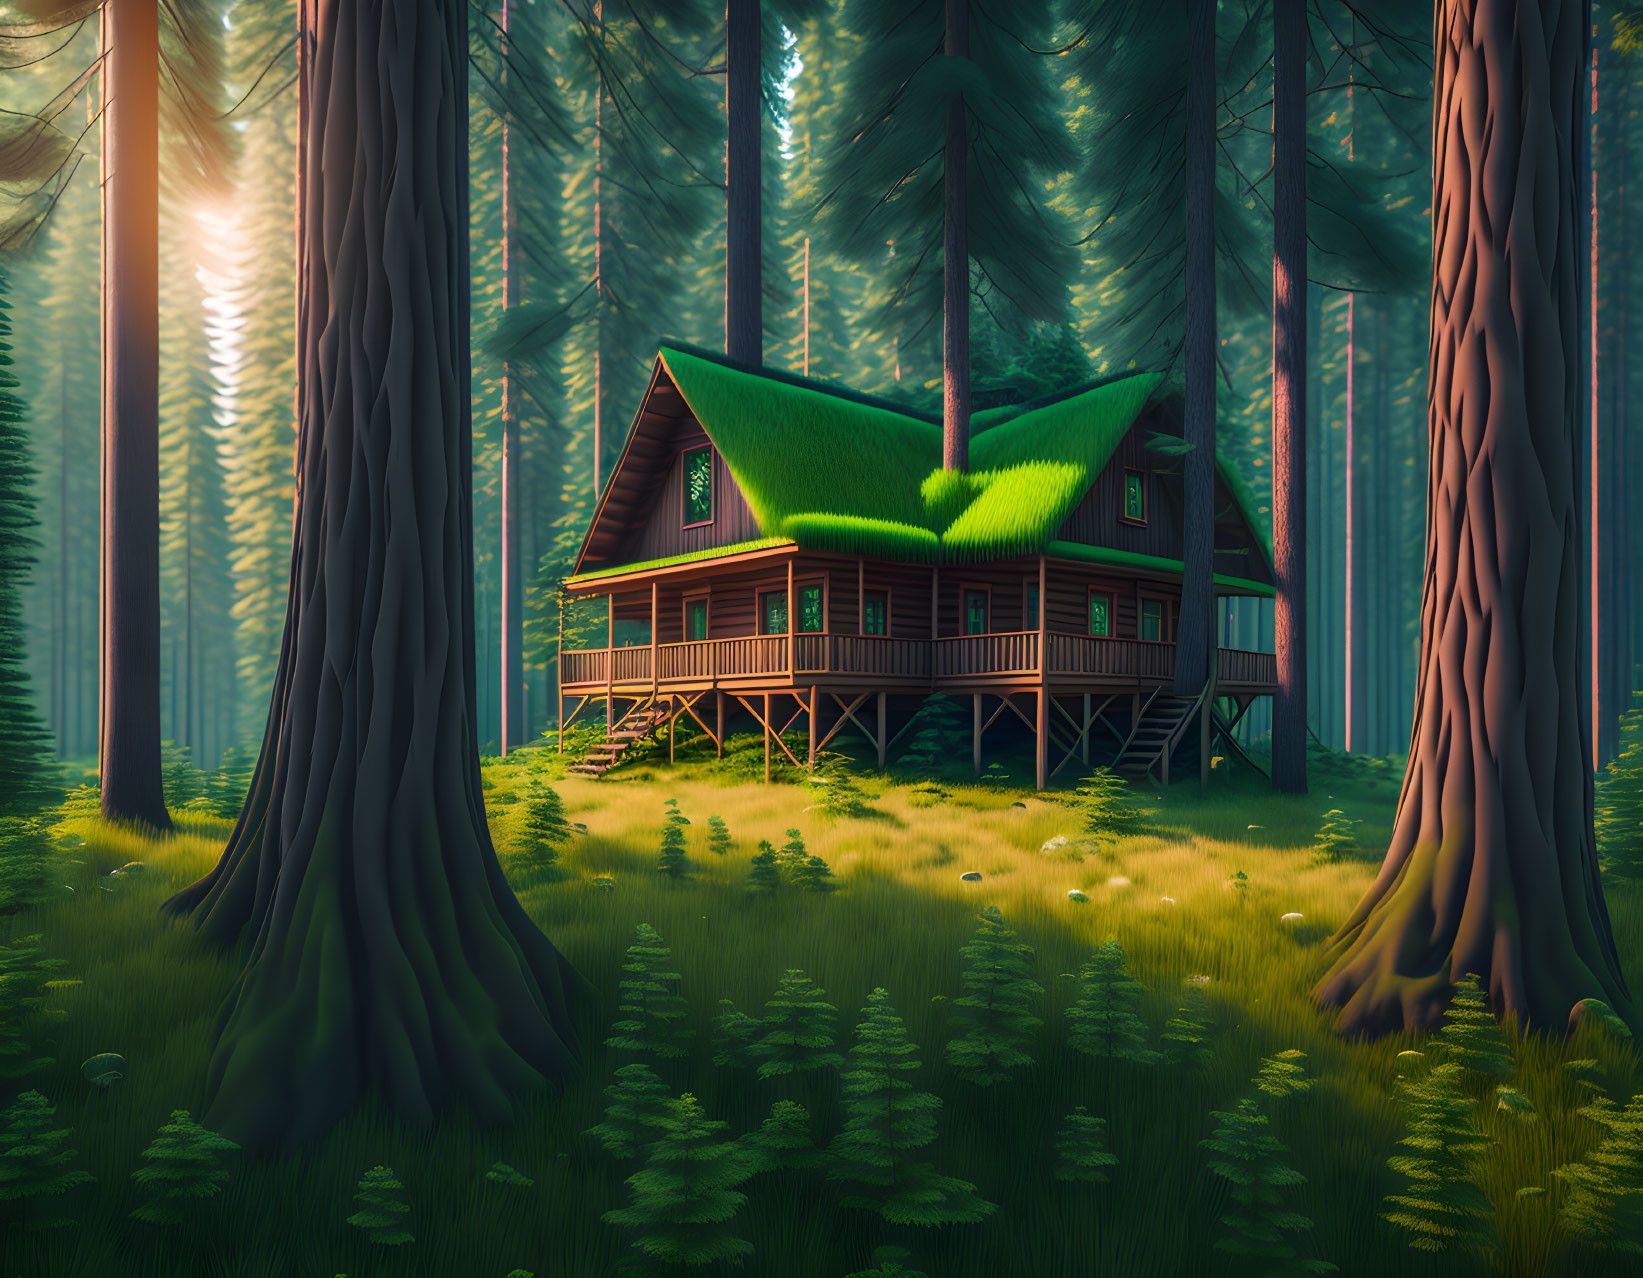 Wooden cabin with green roof in sunlit forest